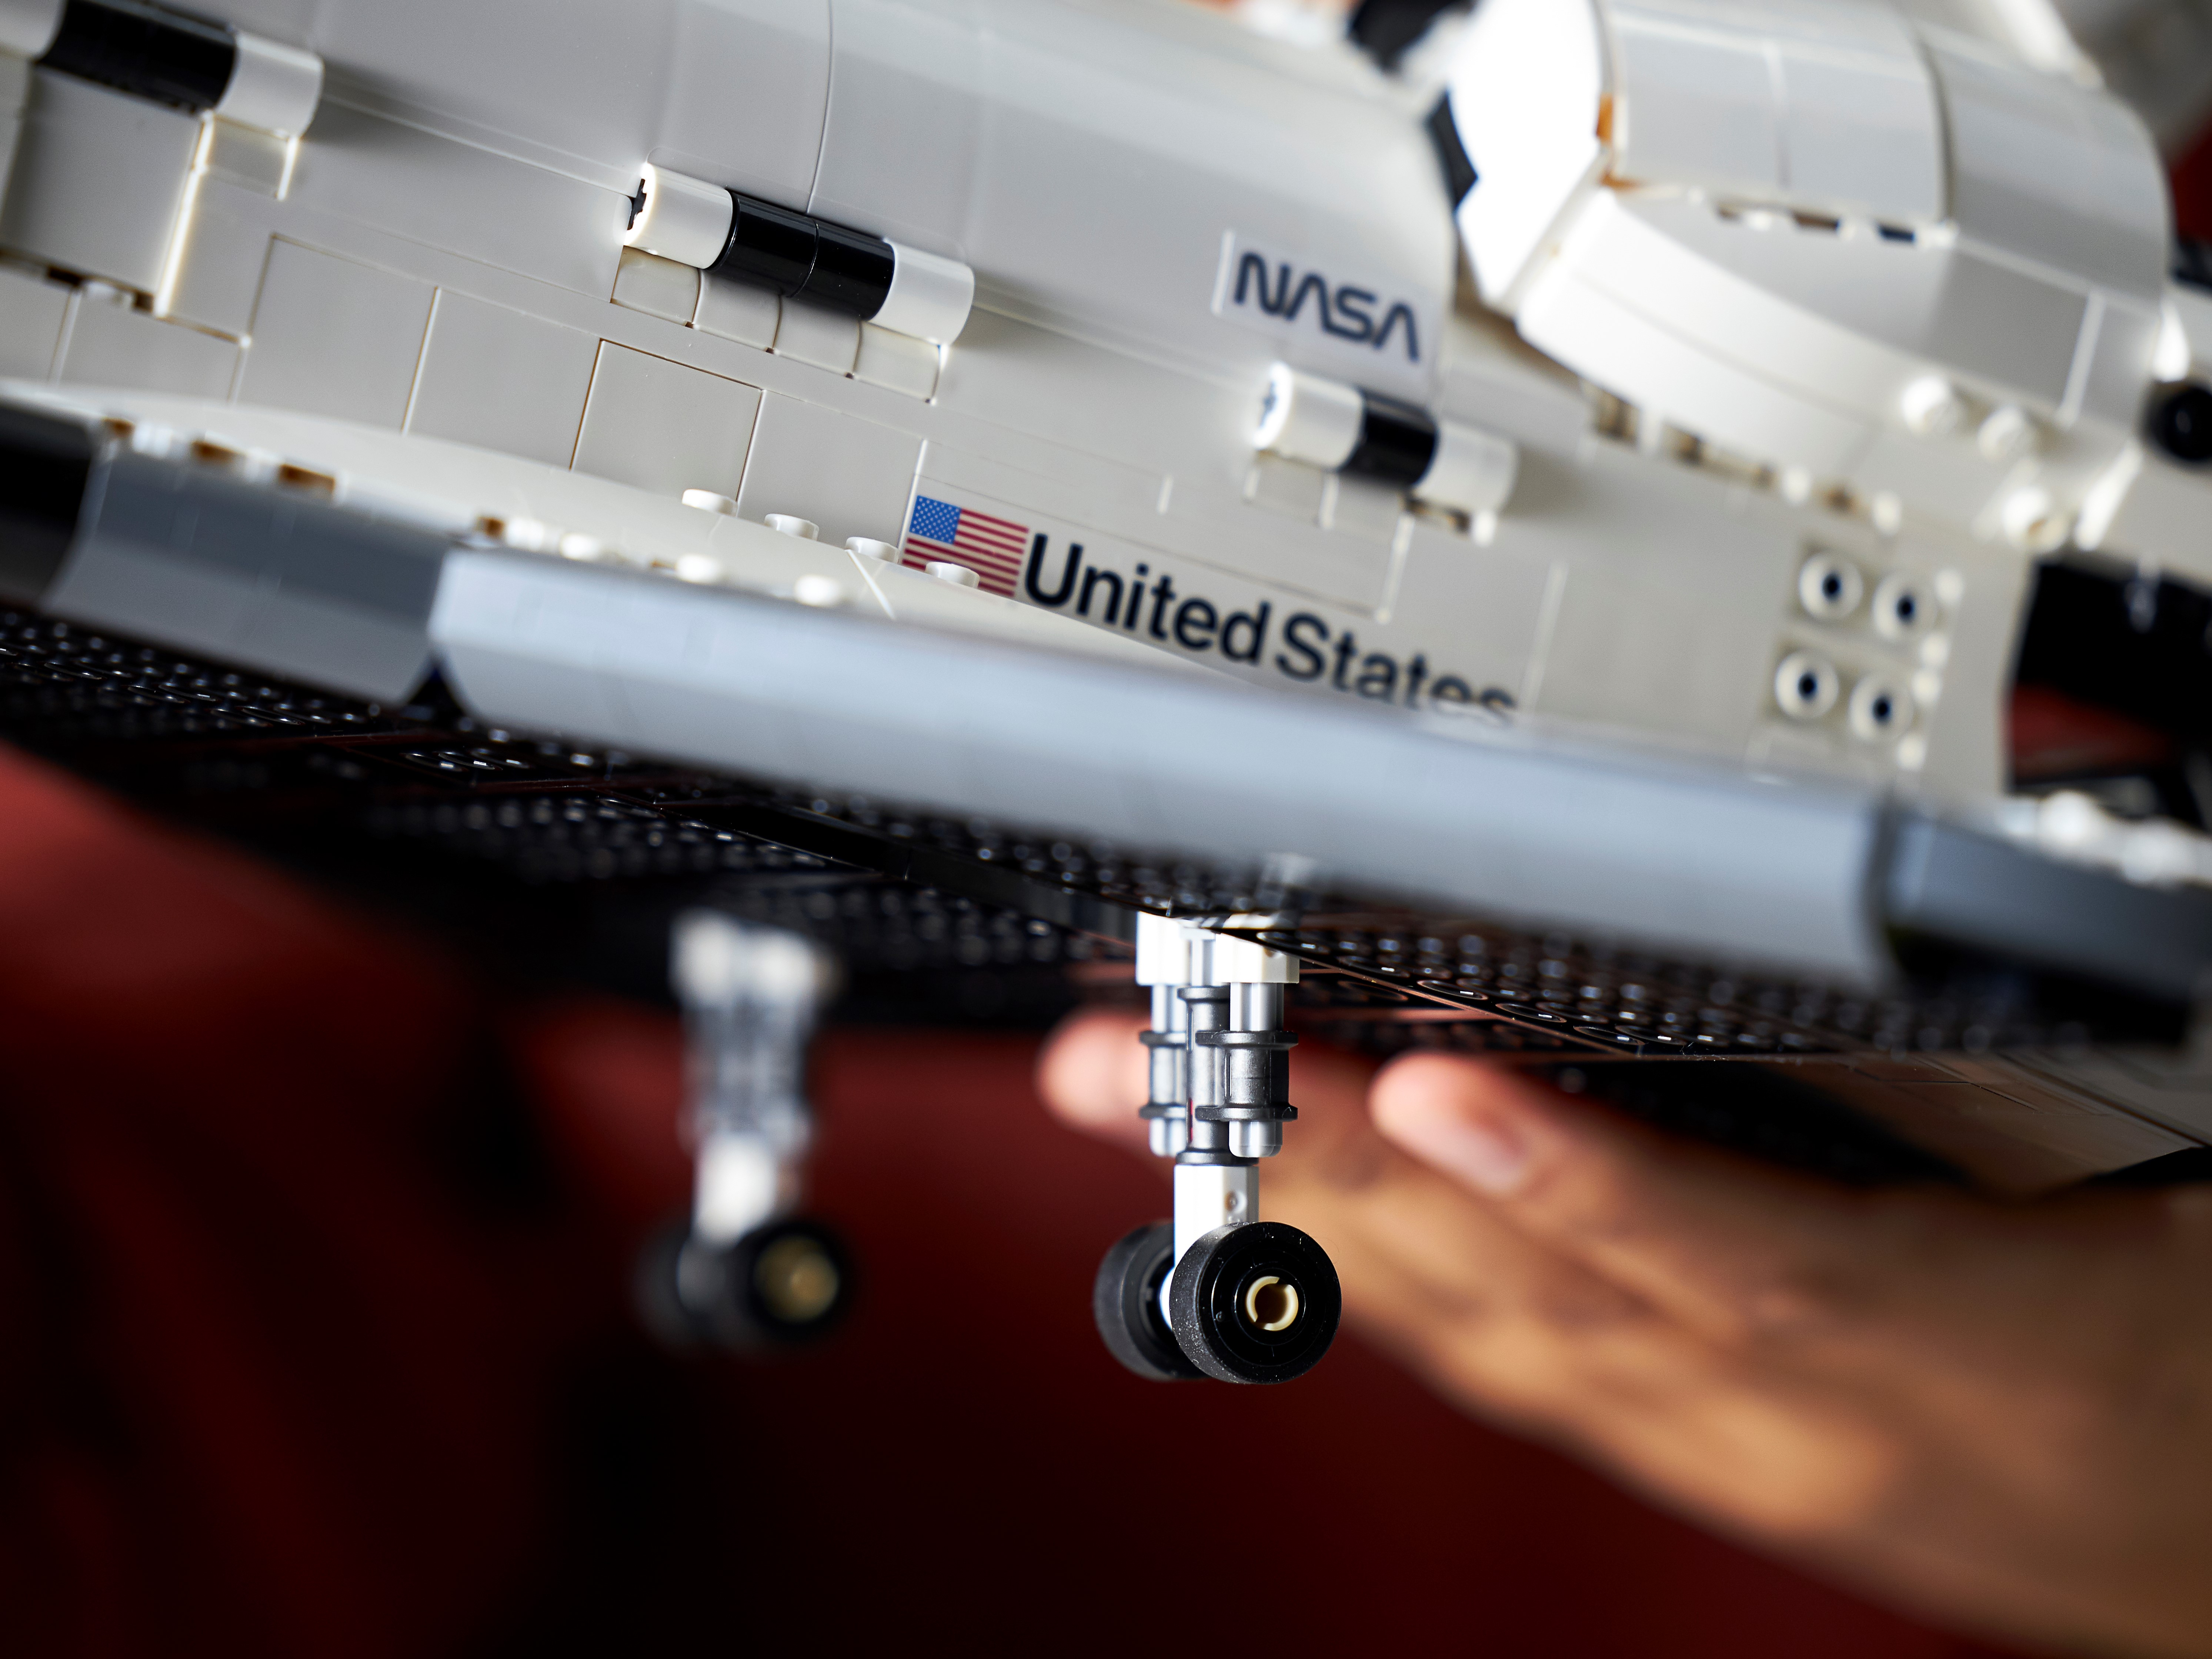 Lego Space Shuttle Discovery - BOOSTED version! 